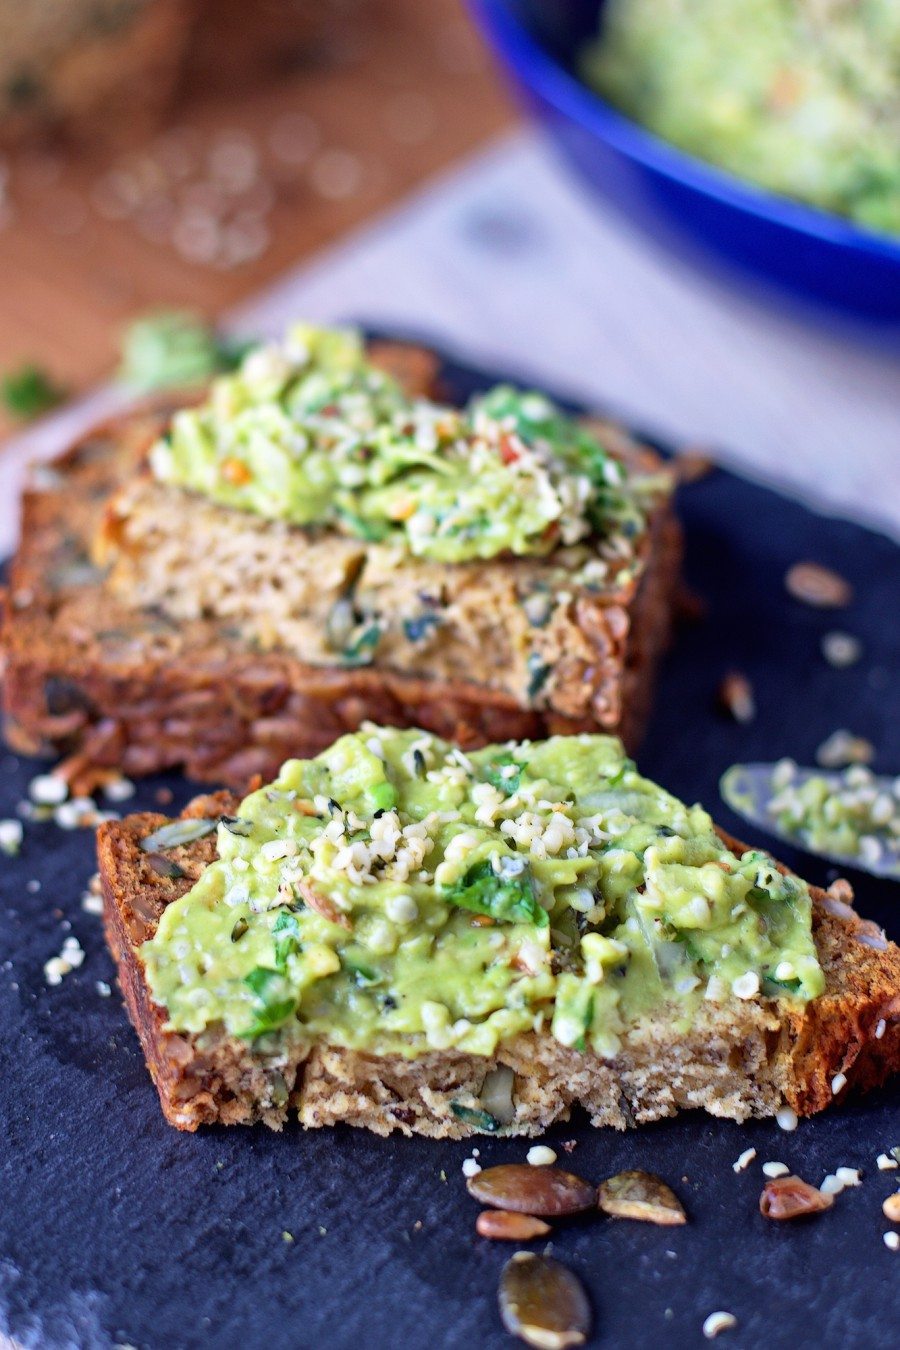 A slice of the Pumpkin & Sunflower Seed Ryebread with Hemp Guacamole in a side view.